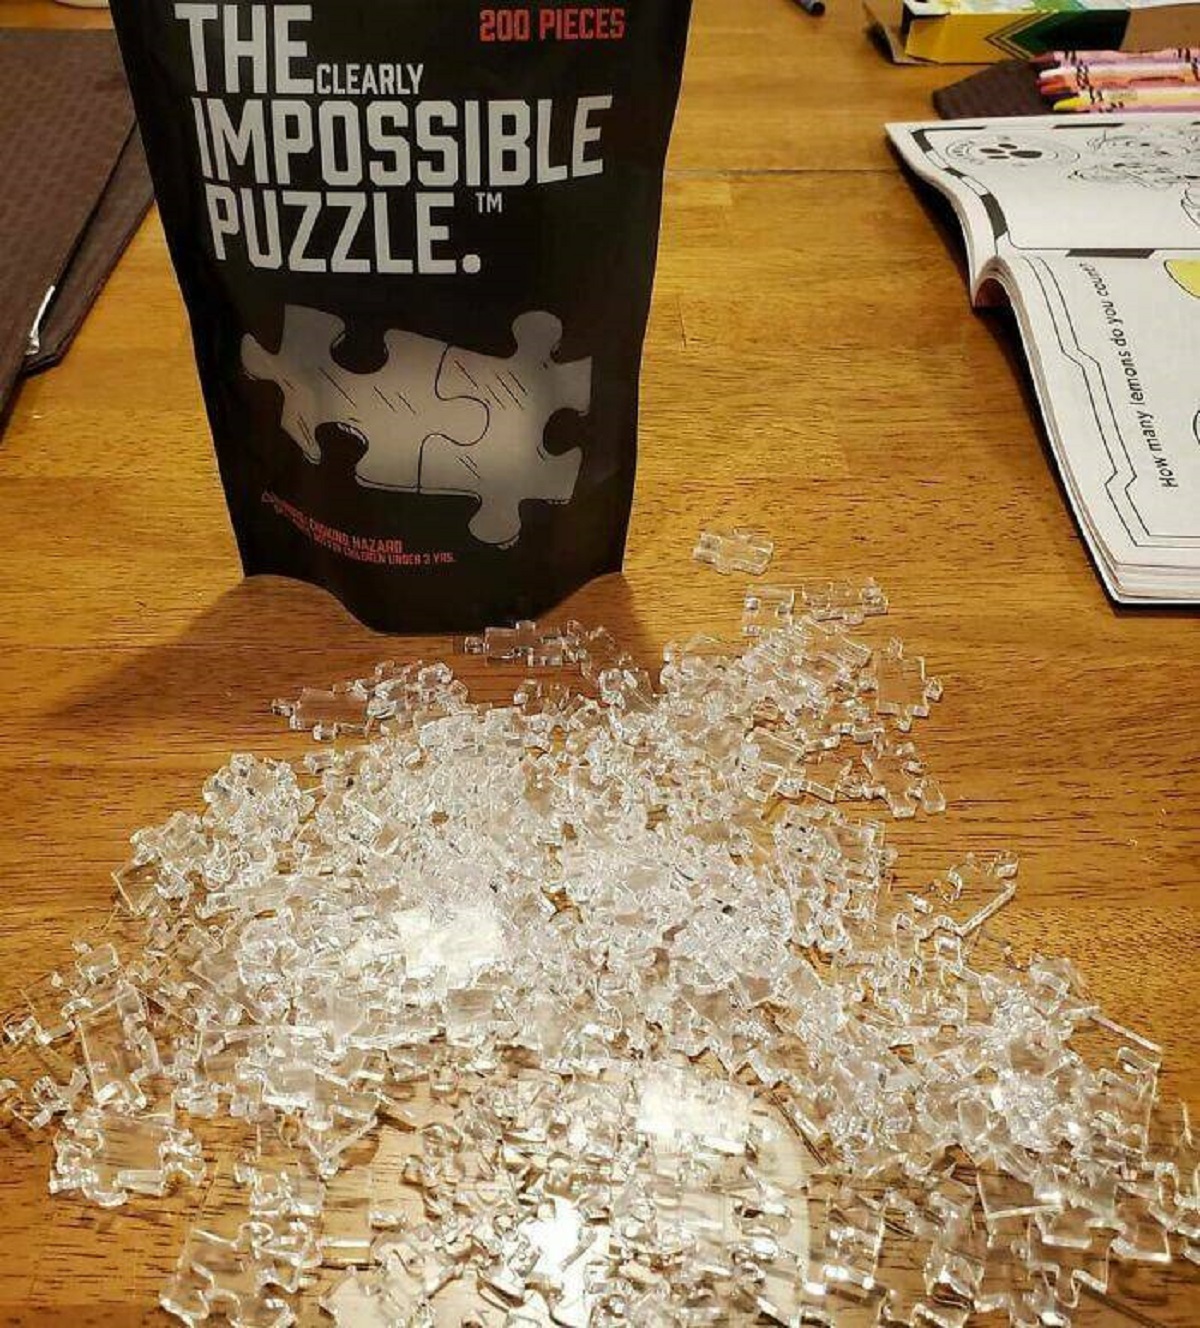 The world's hardest puzzle a.k.a. a clear one.